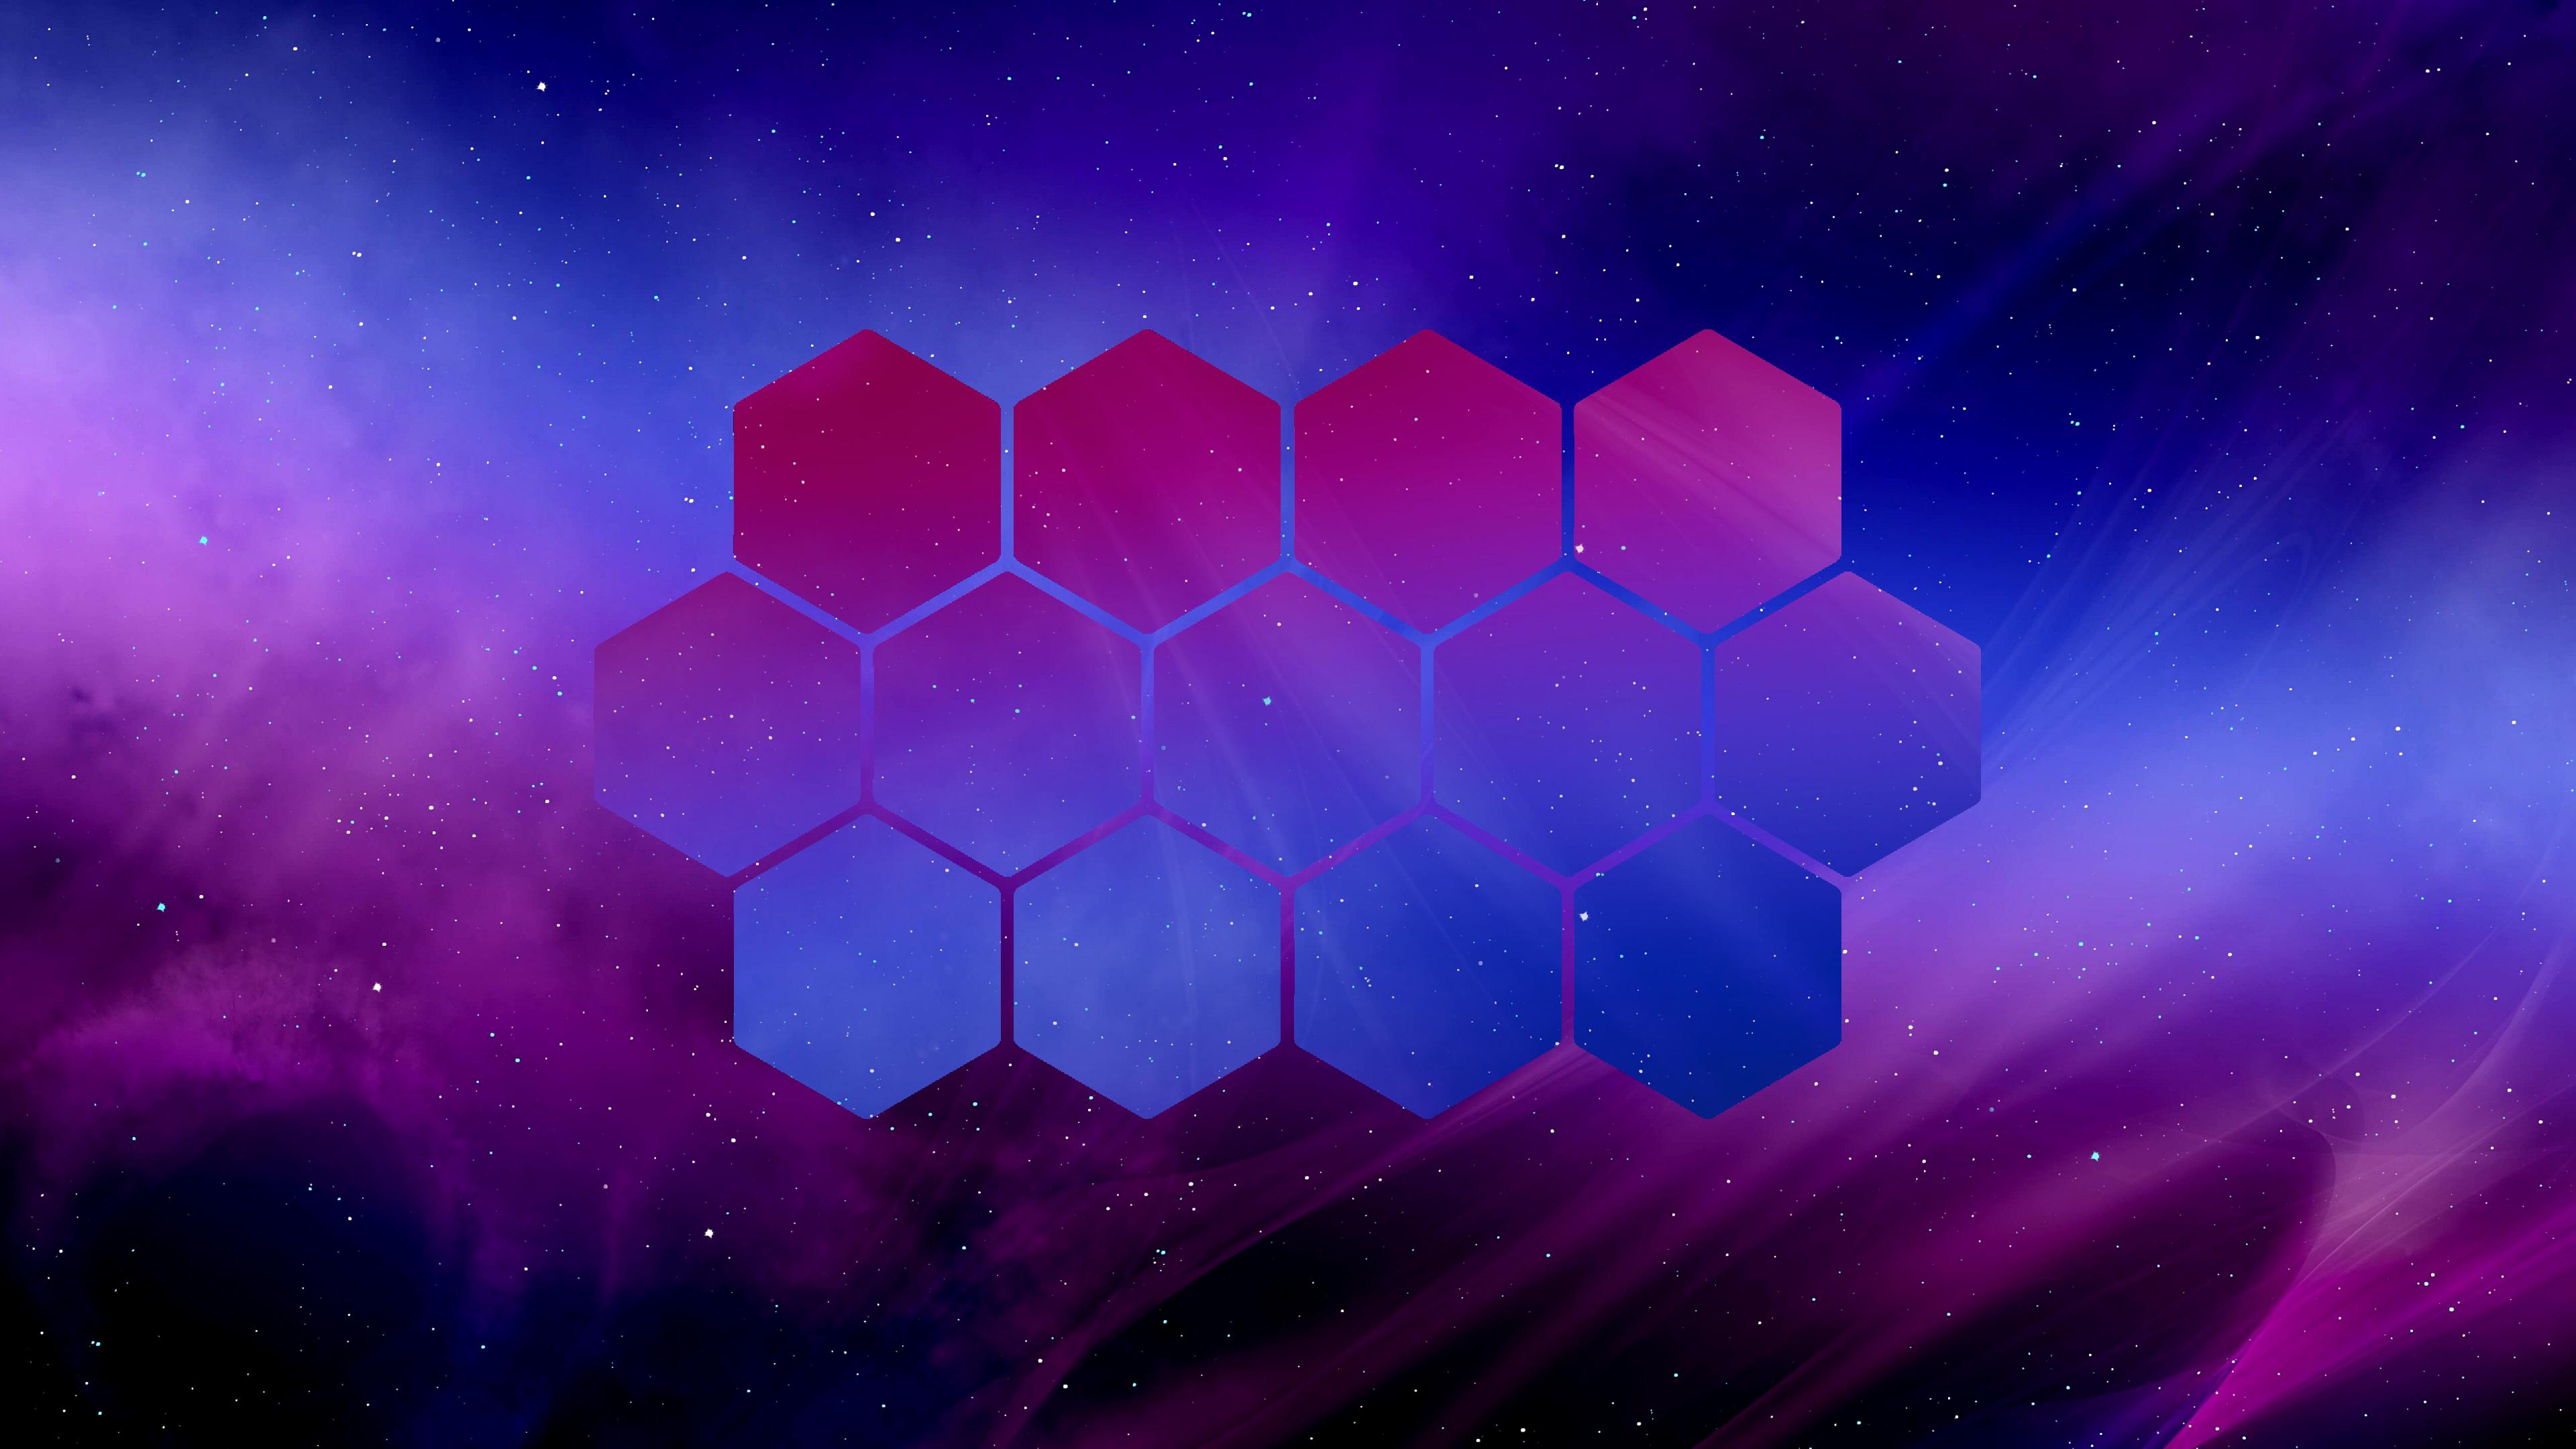 I made a low key bi flag wallpapers and I thought you guys might like it : bisexual